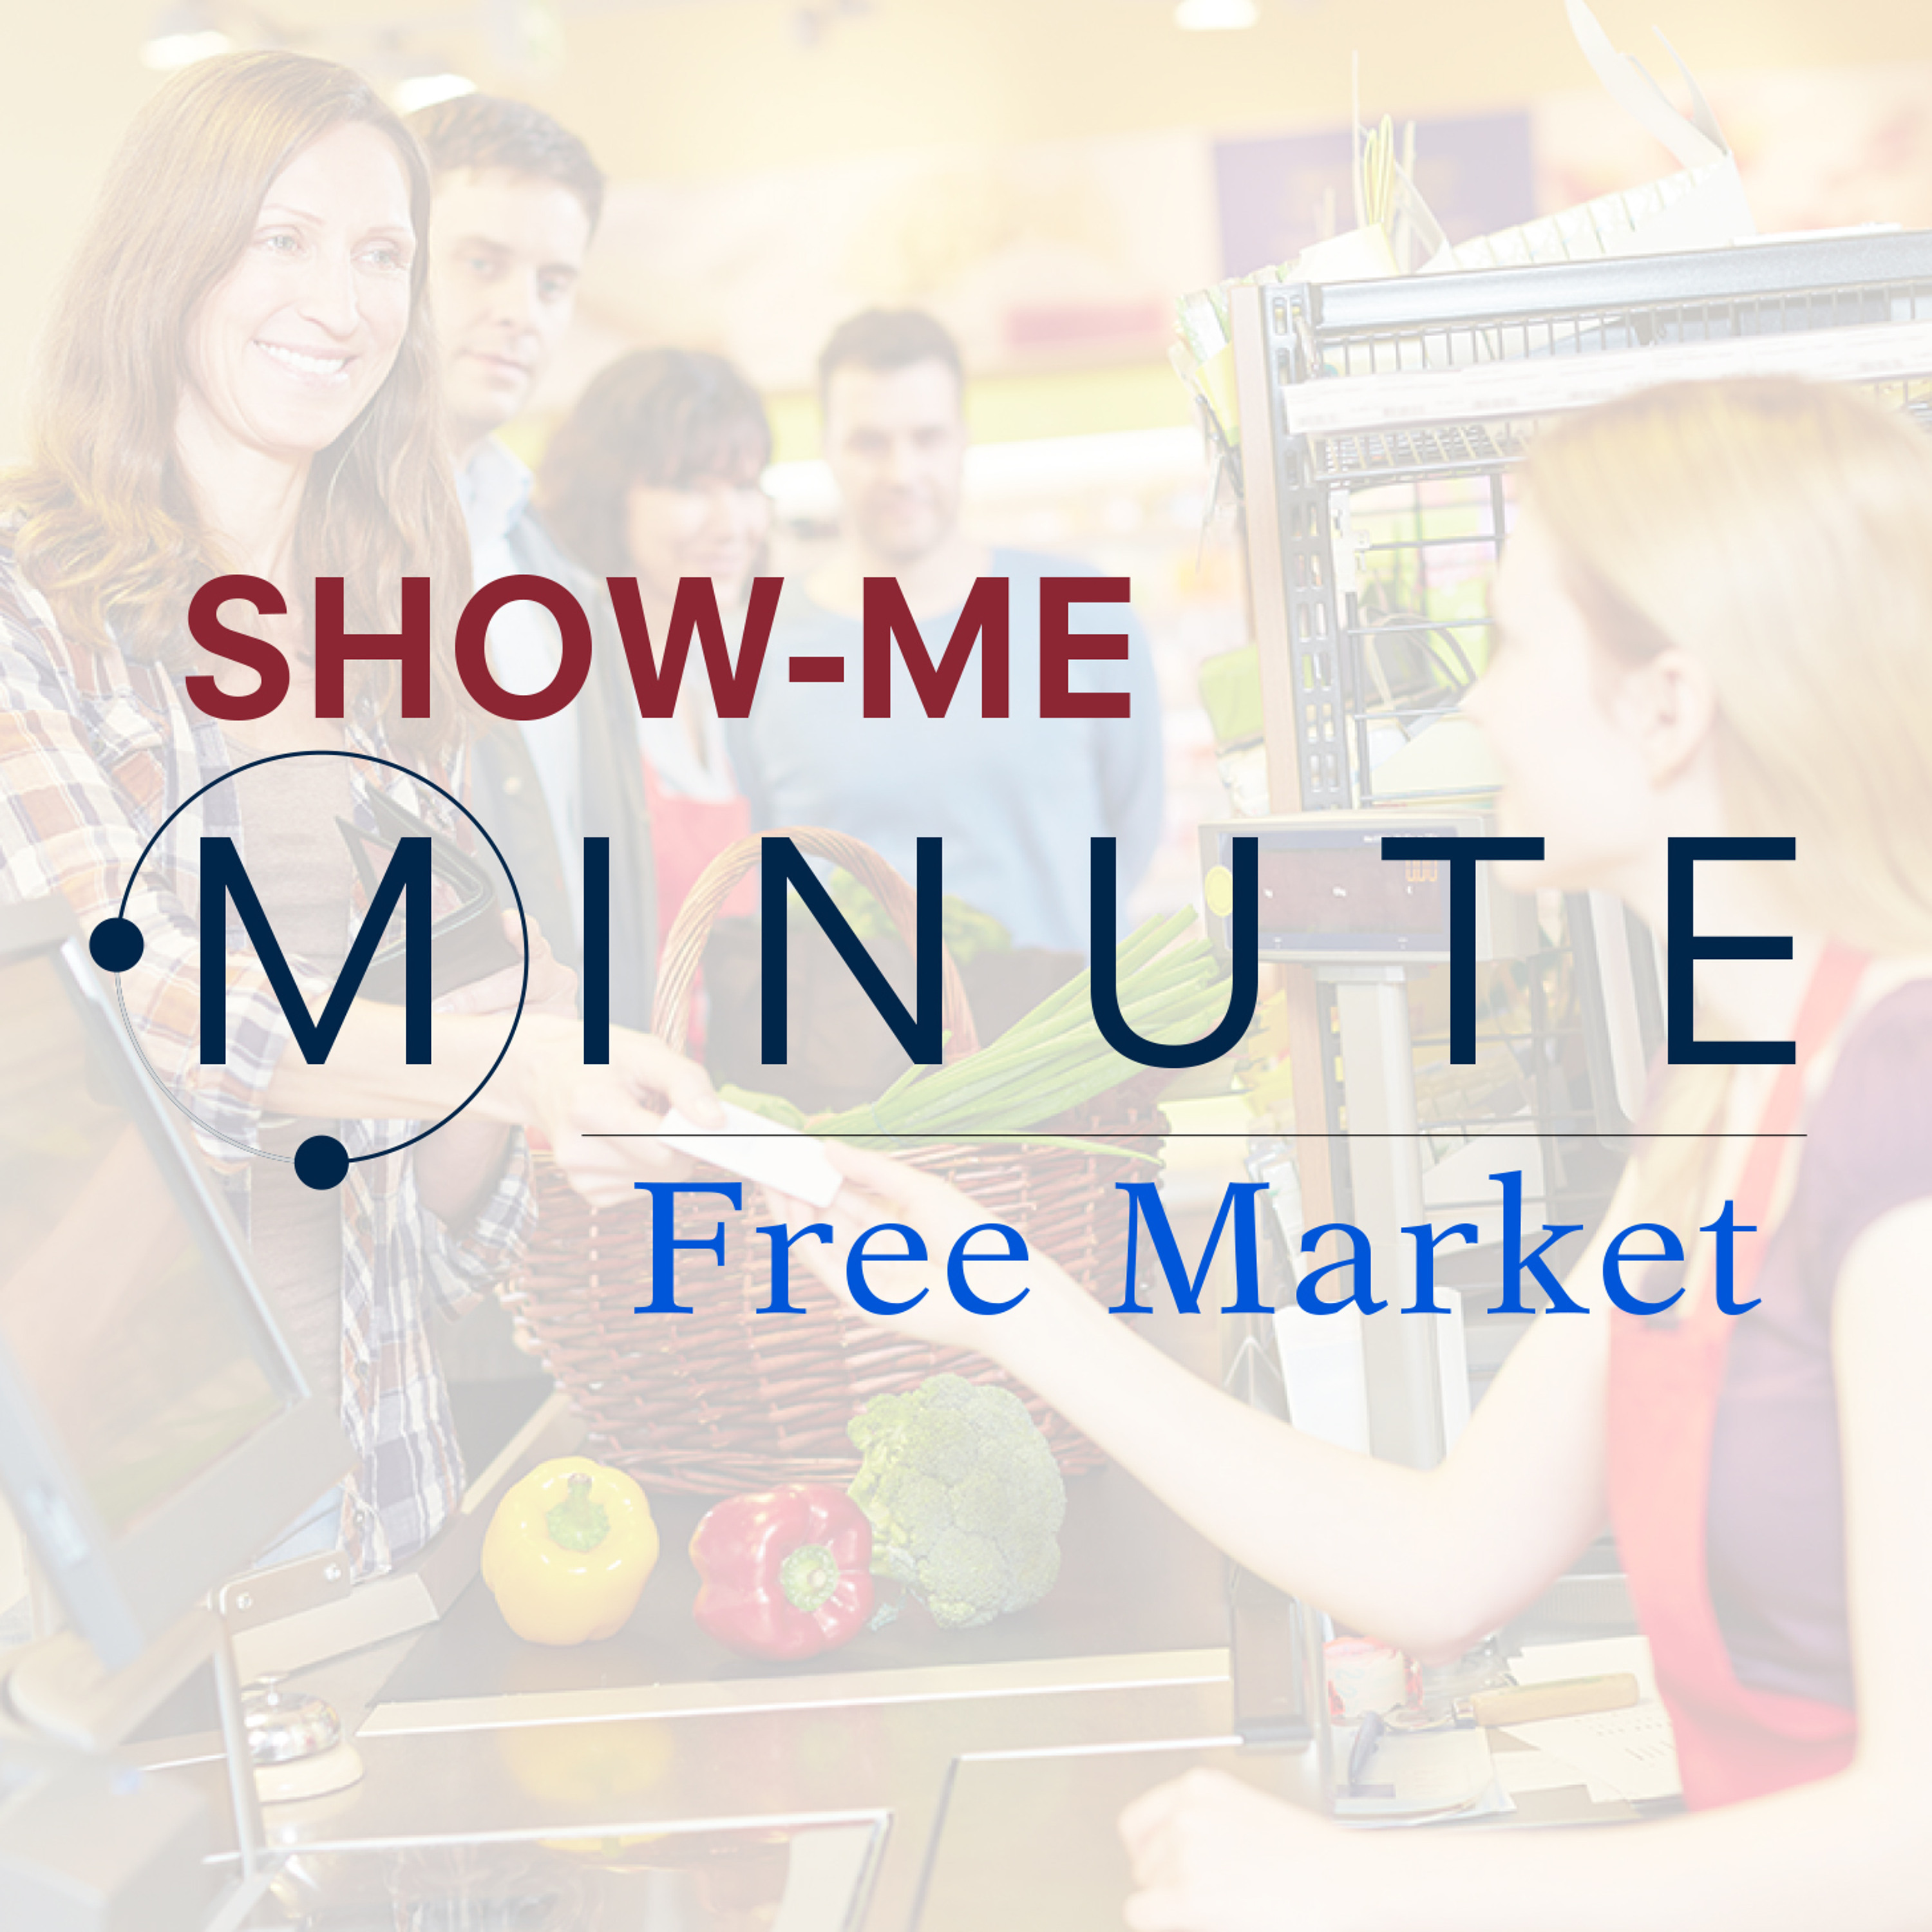 Show-Me Minute: Free Markets